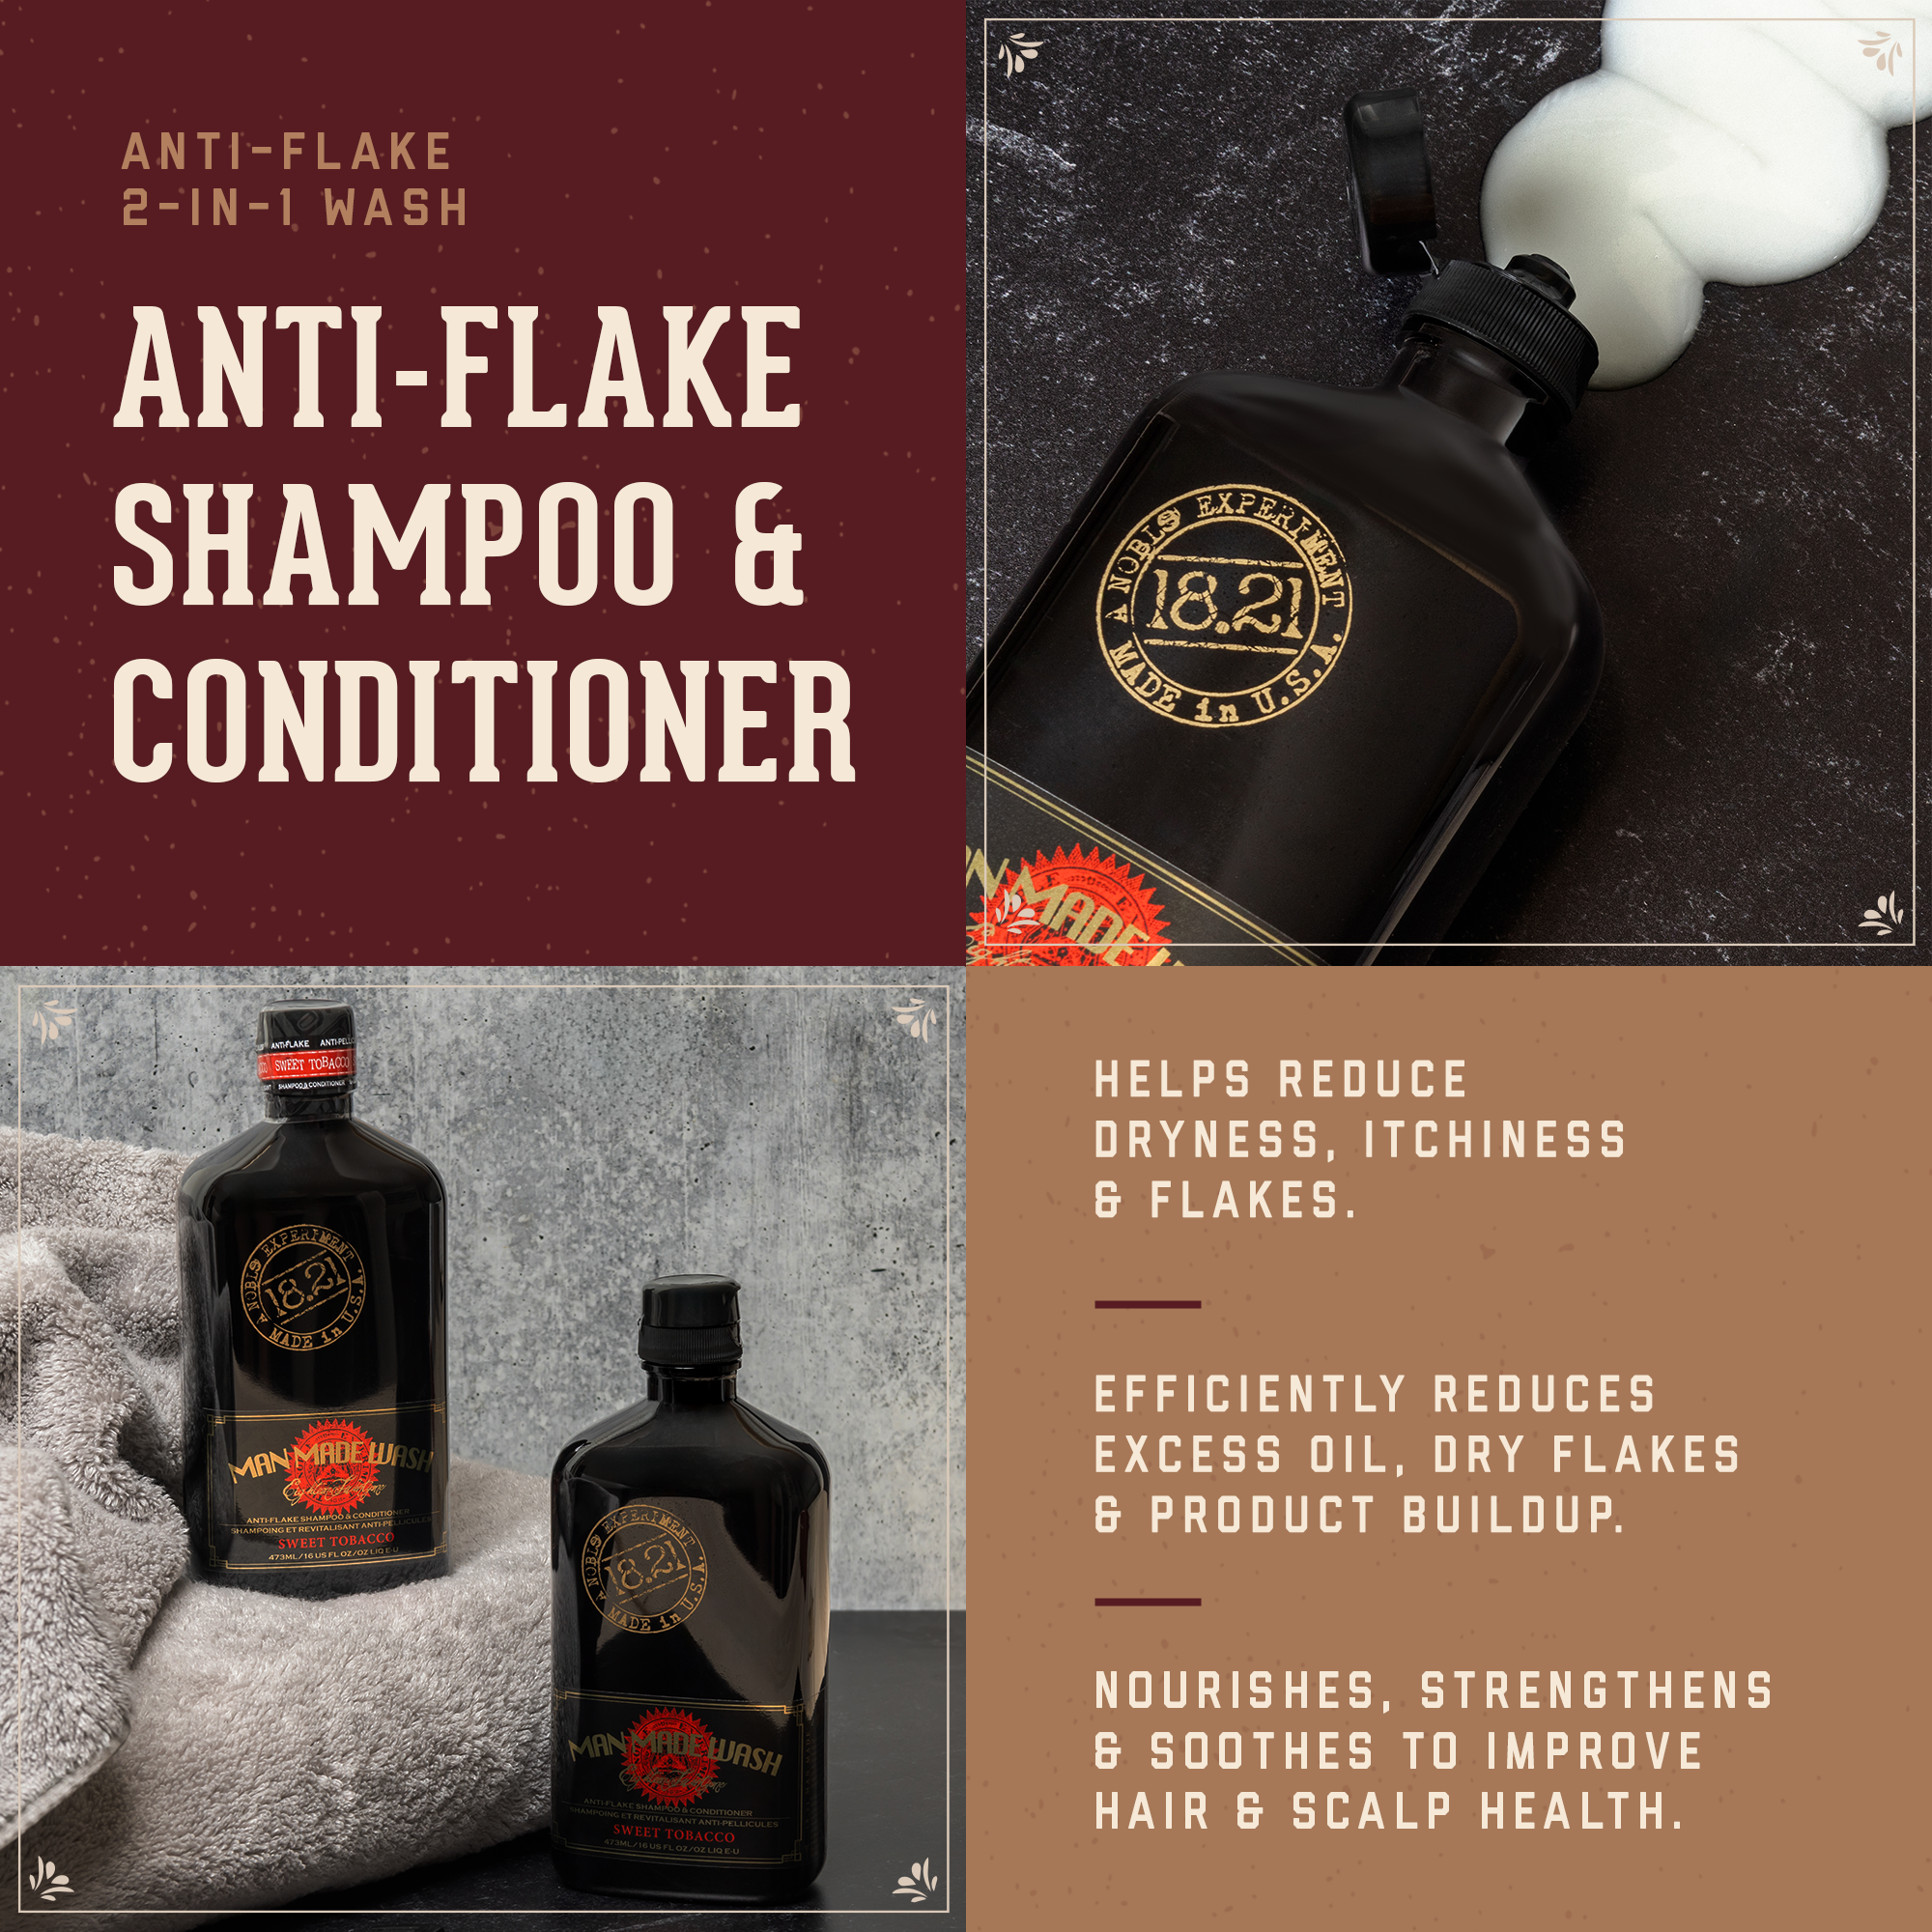 1821 Man Made Anti Flake Shampoo & Conditioner that helps reduce dryness, itchiness, and flakes. Efficiently reduces excess oil, dry flakes and product build up.  Nourishes strenthens and soothes to improve hair and scalp health